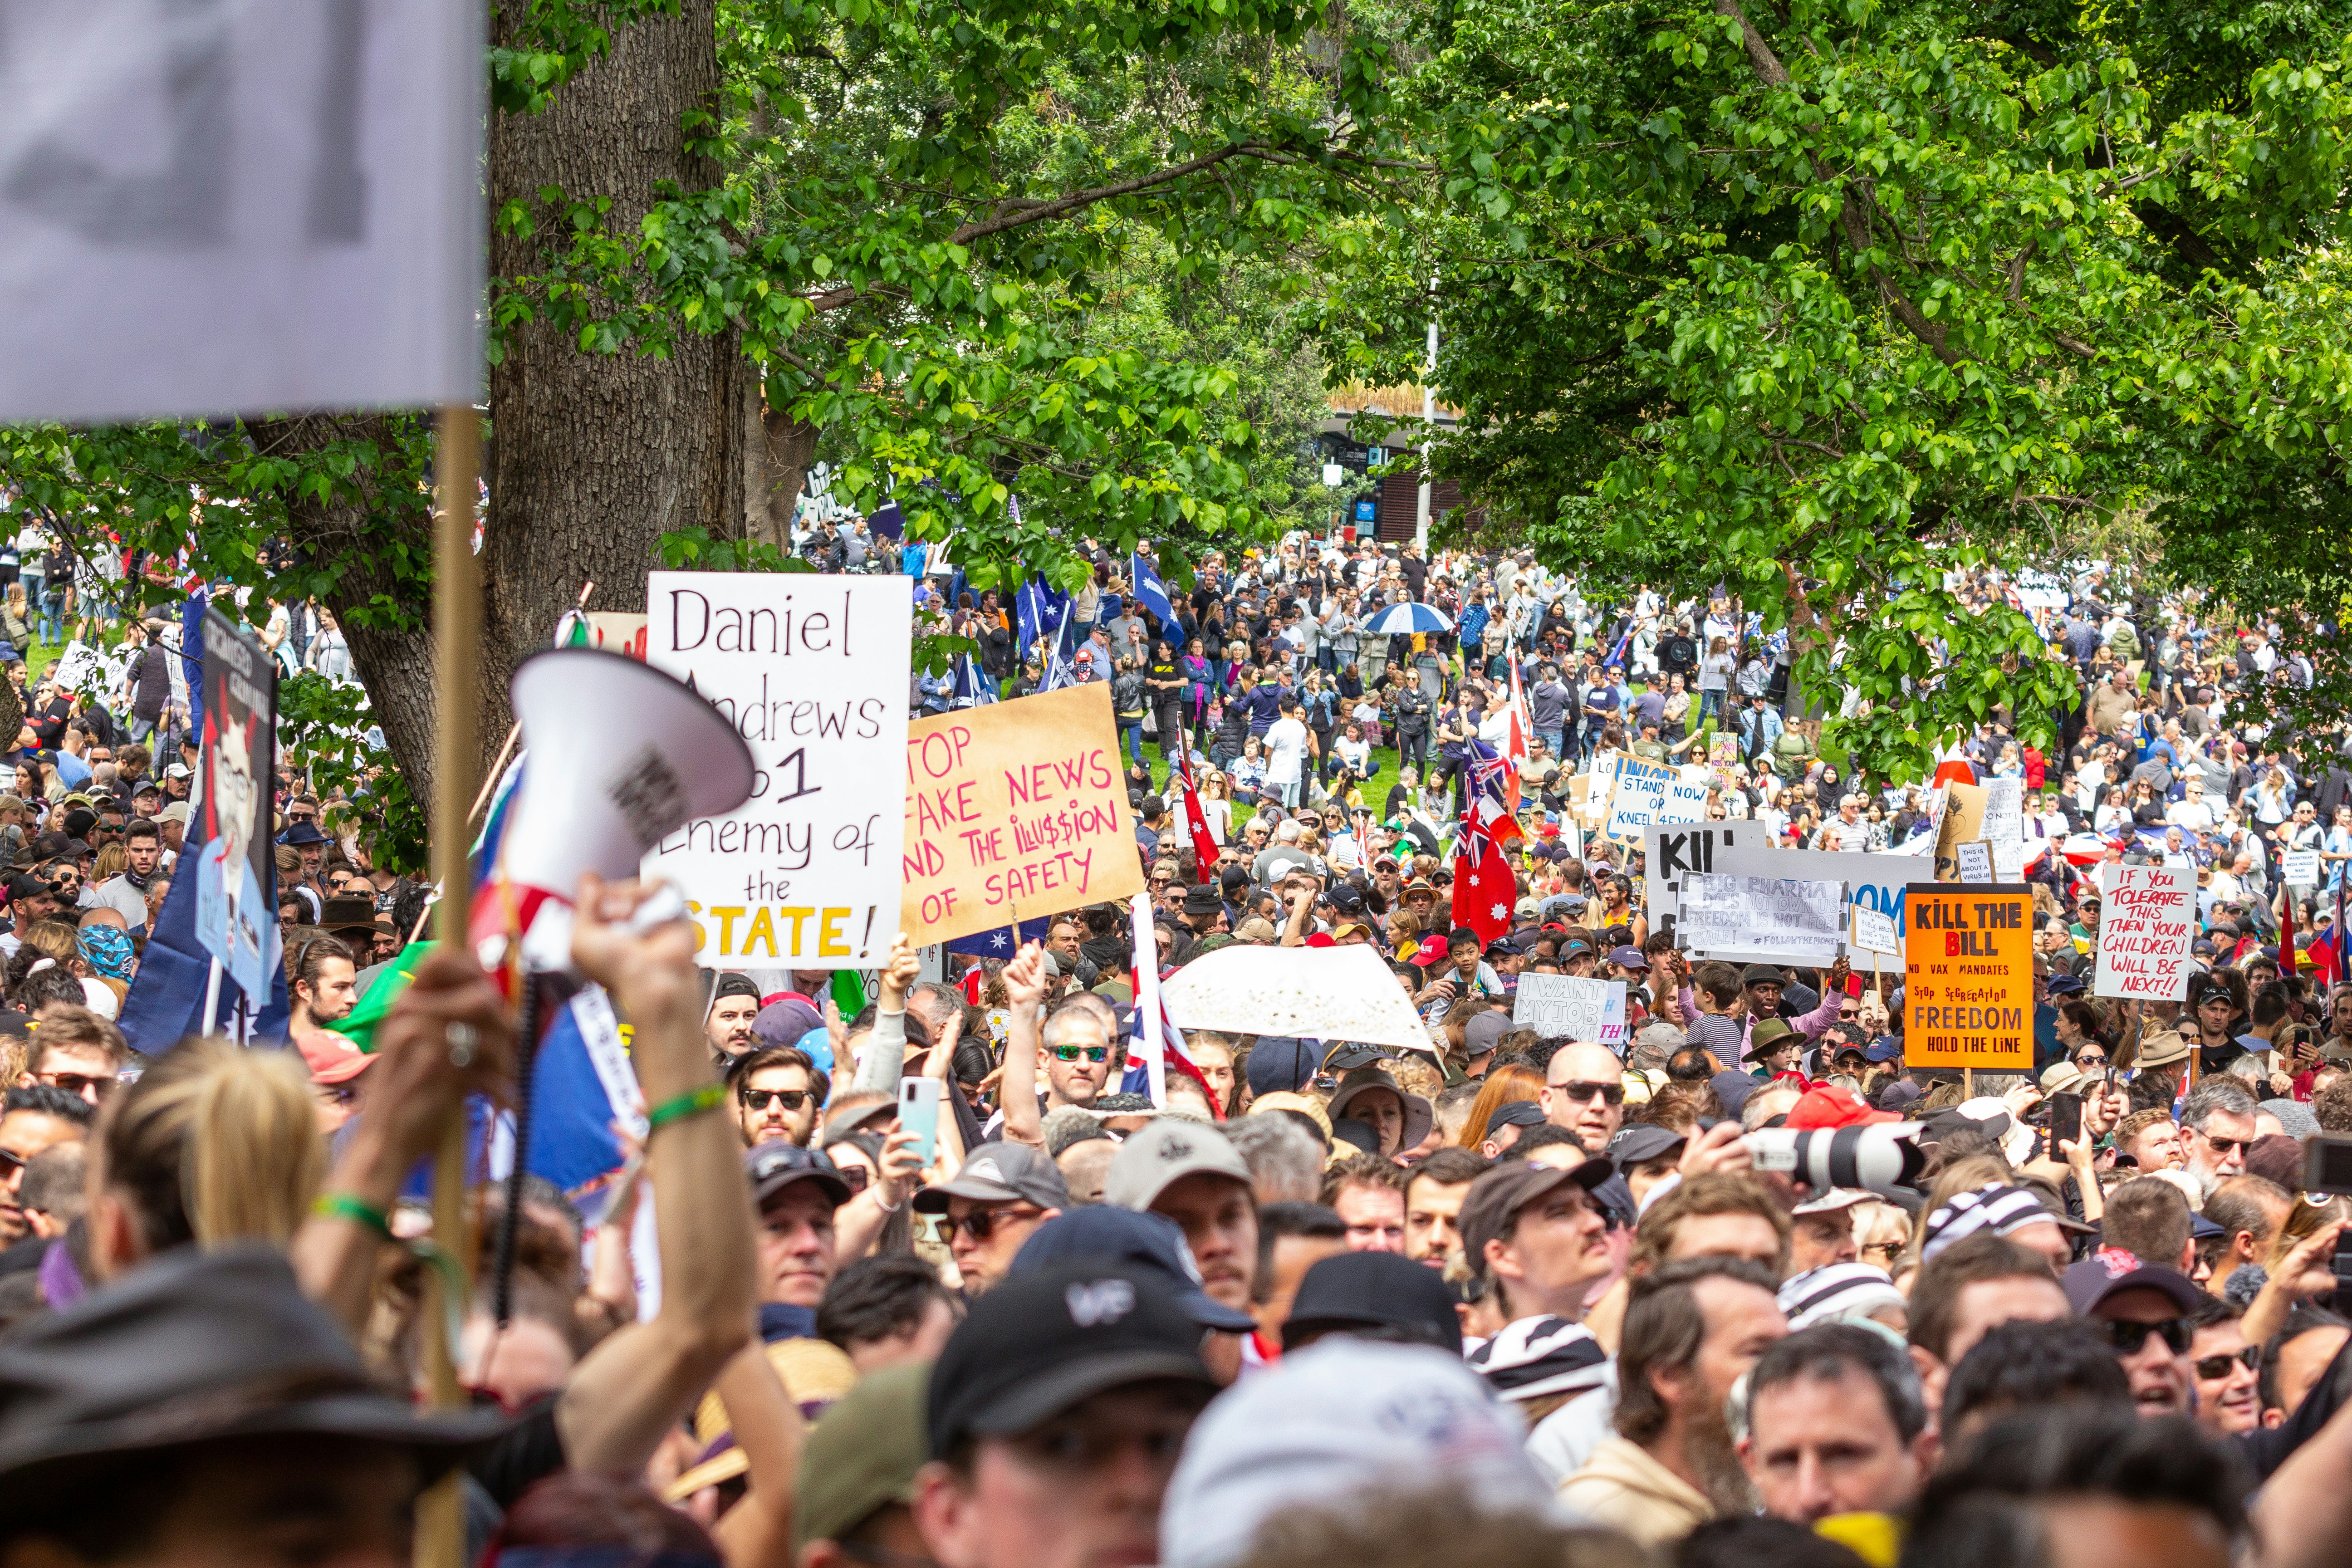 Melbourne's Freedom protests rally and march in the city November 20th 2021 - over 200,000 people marched from Parliament to the Flagstaff Gardens. A happy family friendly crowd singing and chanting \